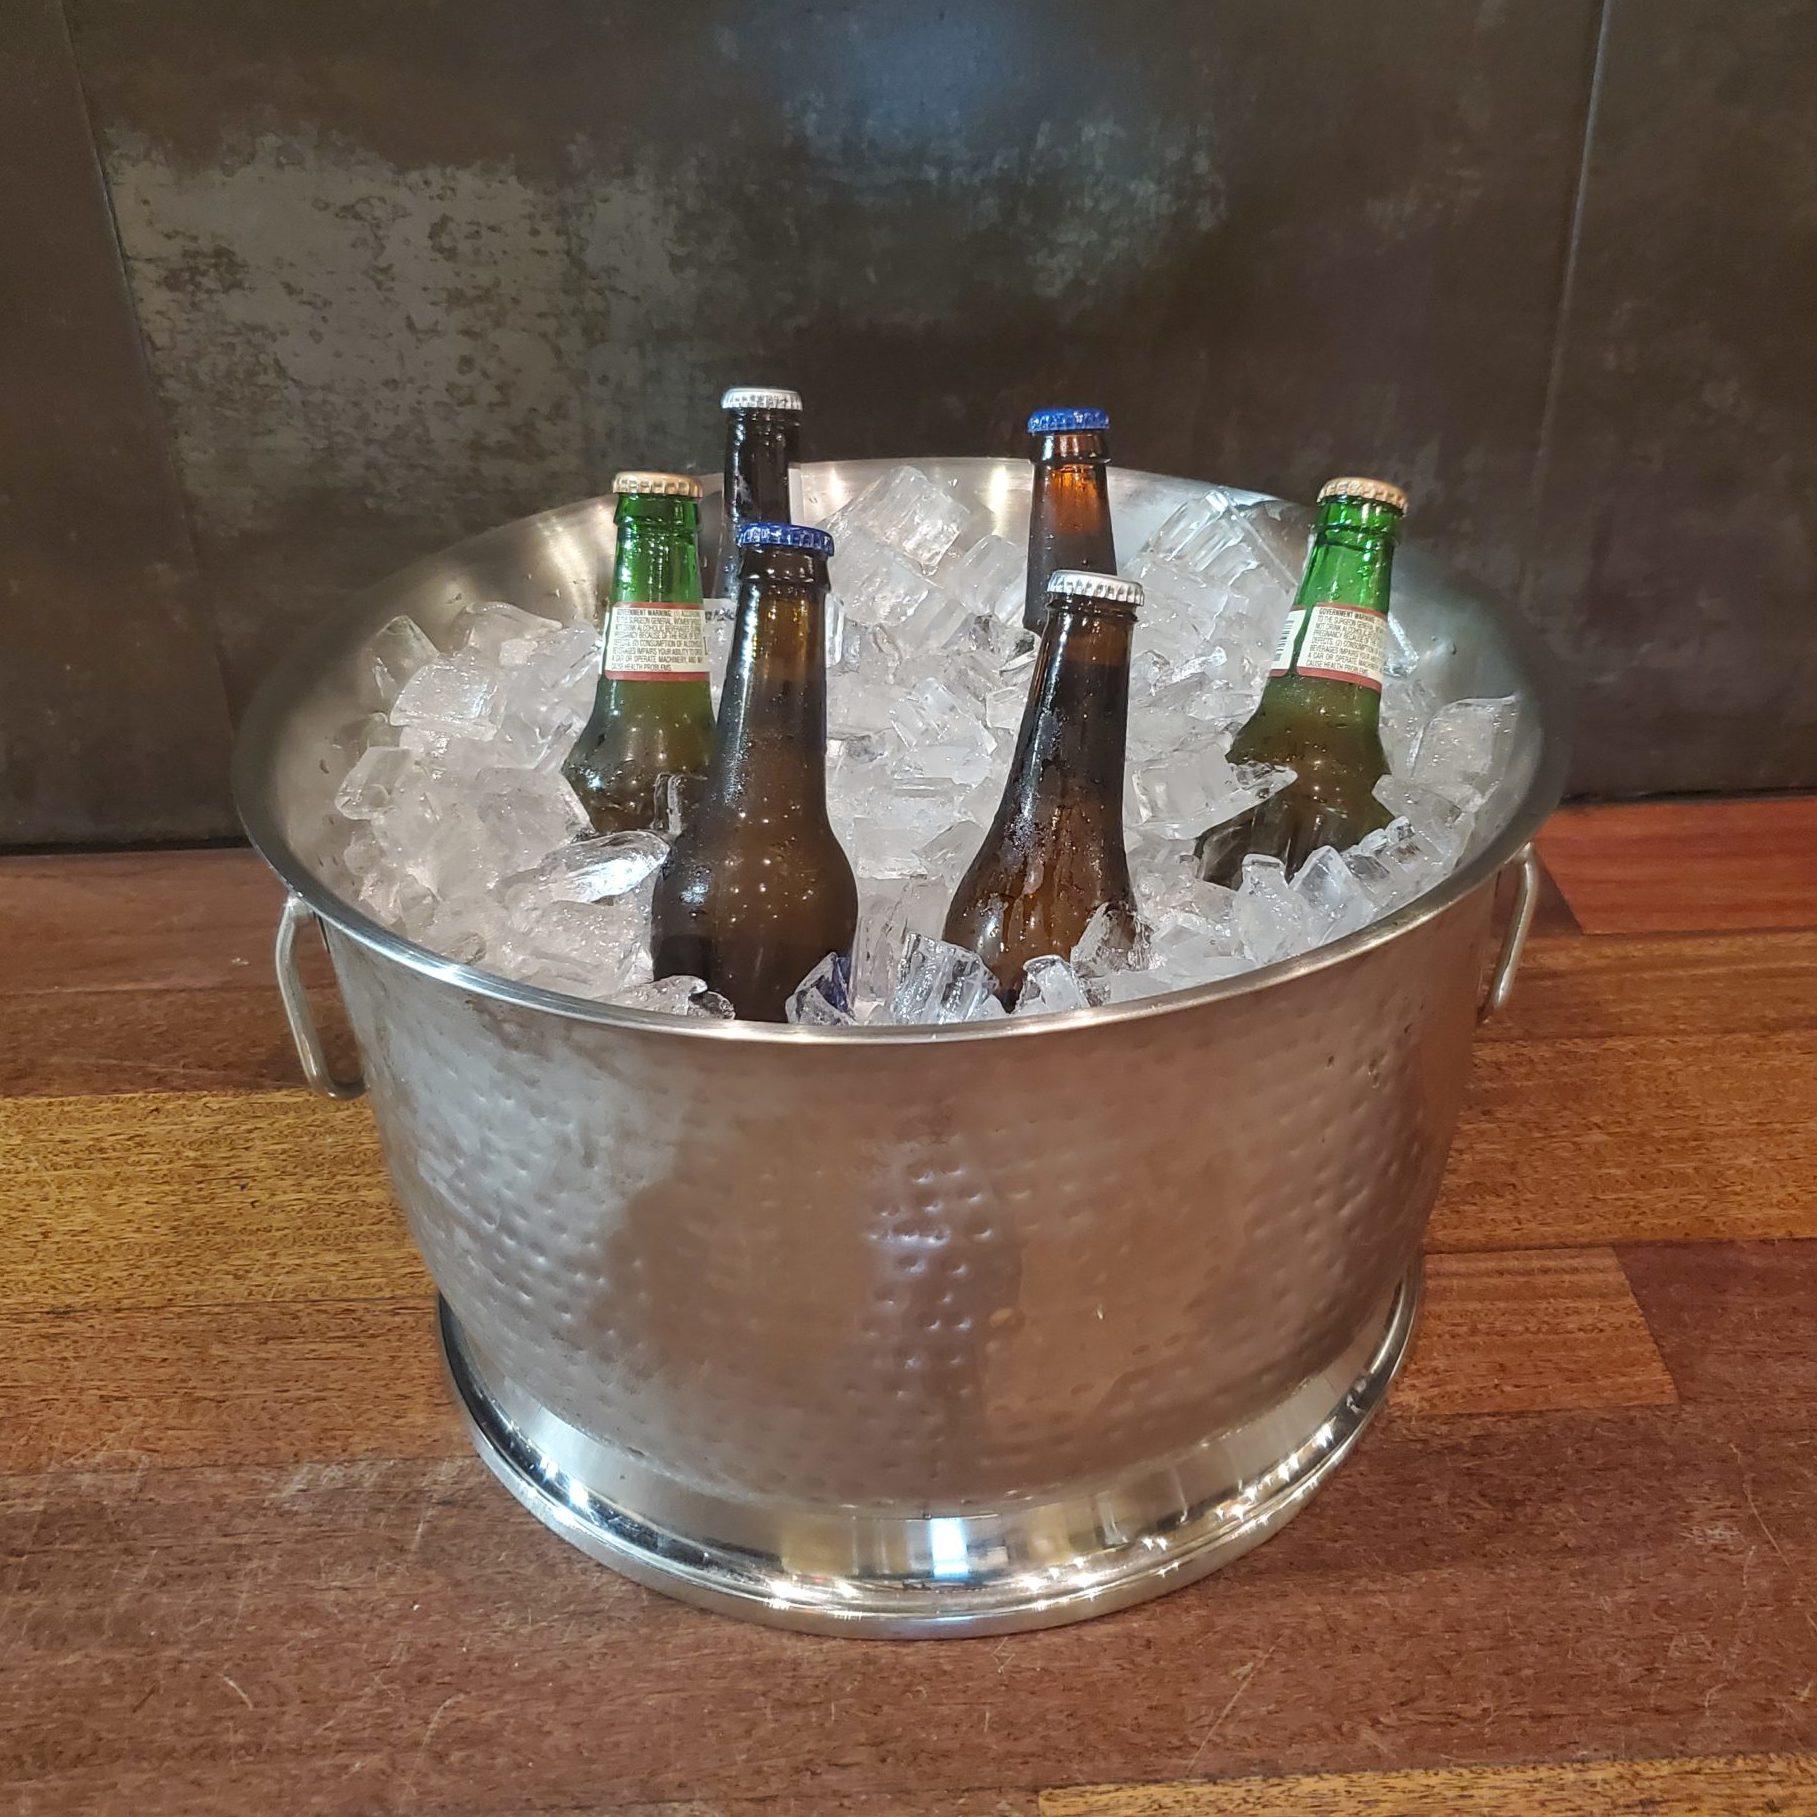 Hammered Steel Bowl filled with House Beers and Ice, offered at downtown St. Pete, Florida venue NOVA 535